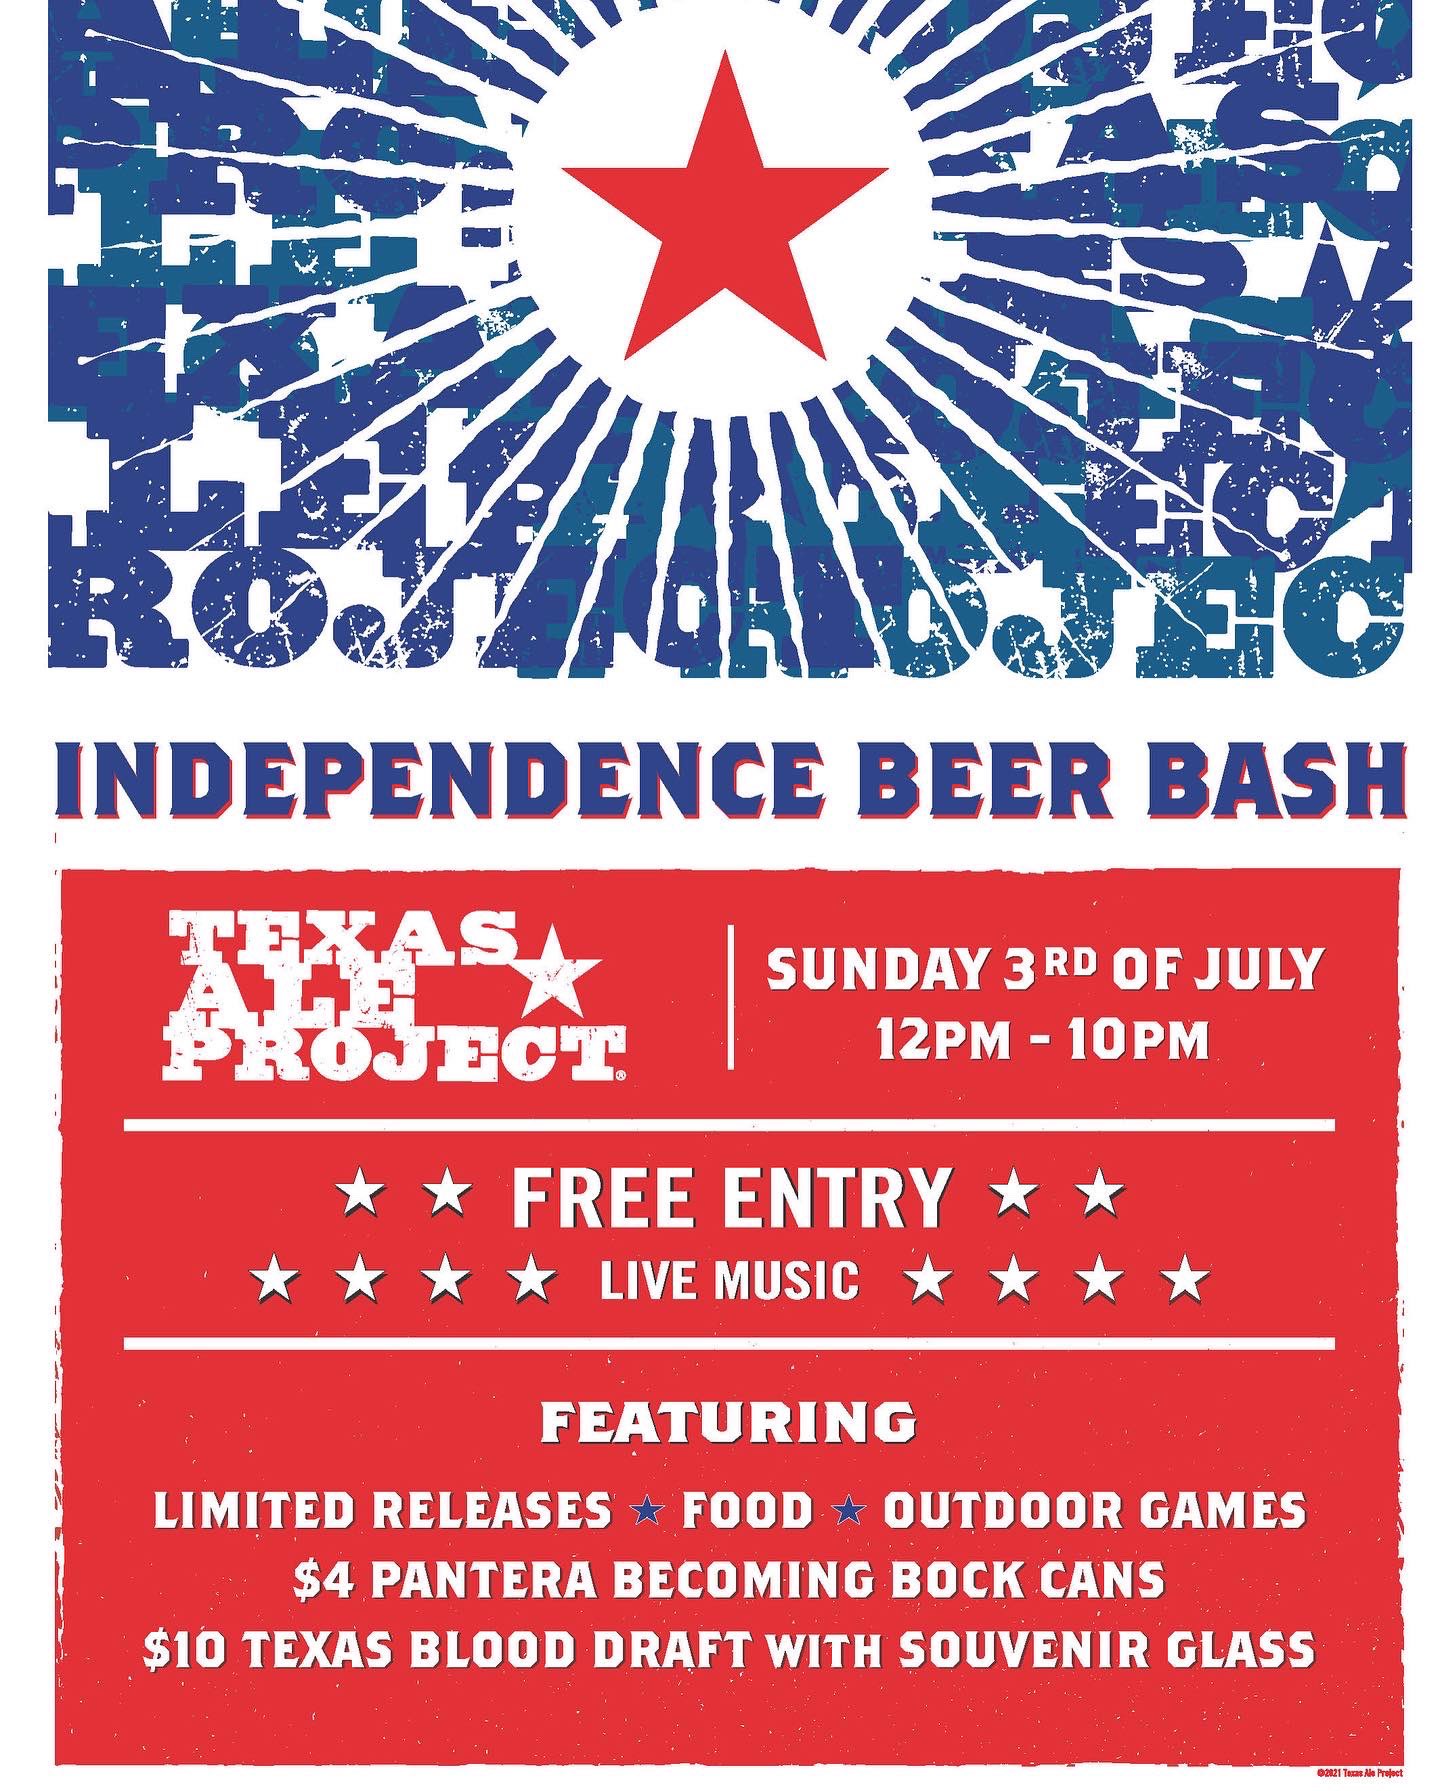 Texas Ale Project Tomorrow Is Our Independence Beer Bash Party We Have Extended Sunday Hours From 12 10pm We Ll Have Food Refreshing Summer Drafts Live Music Games And Fun For The